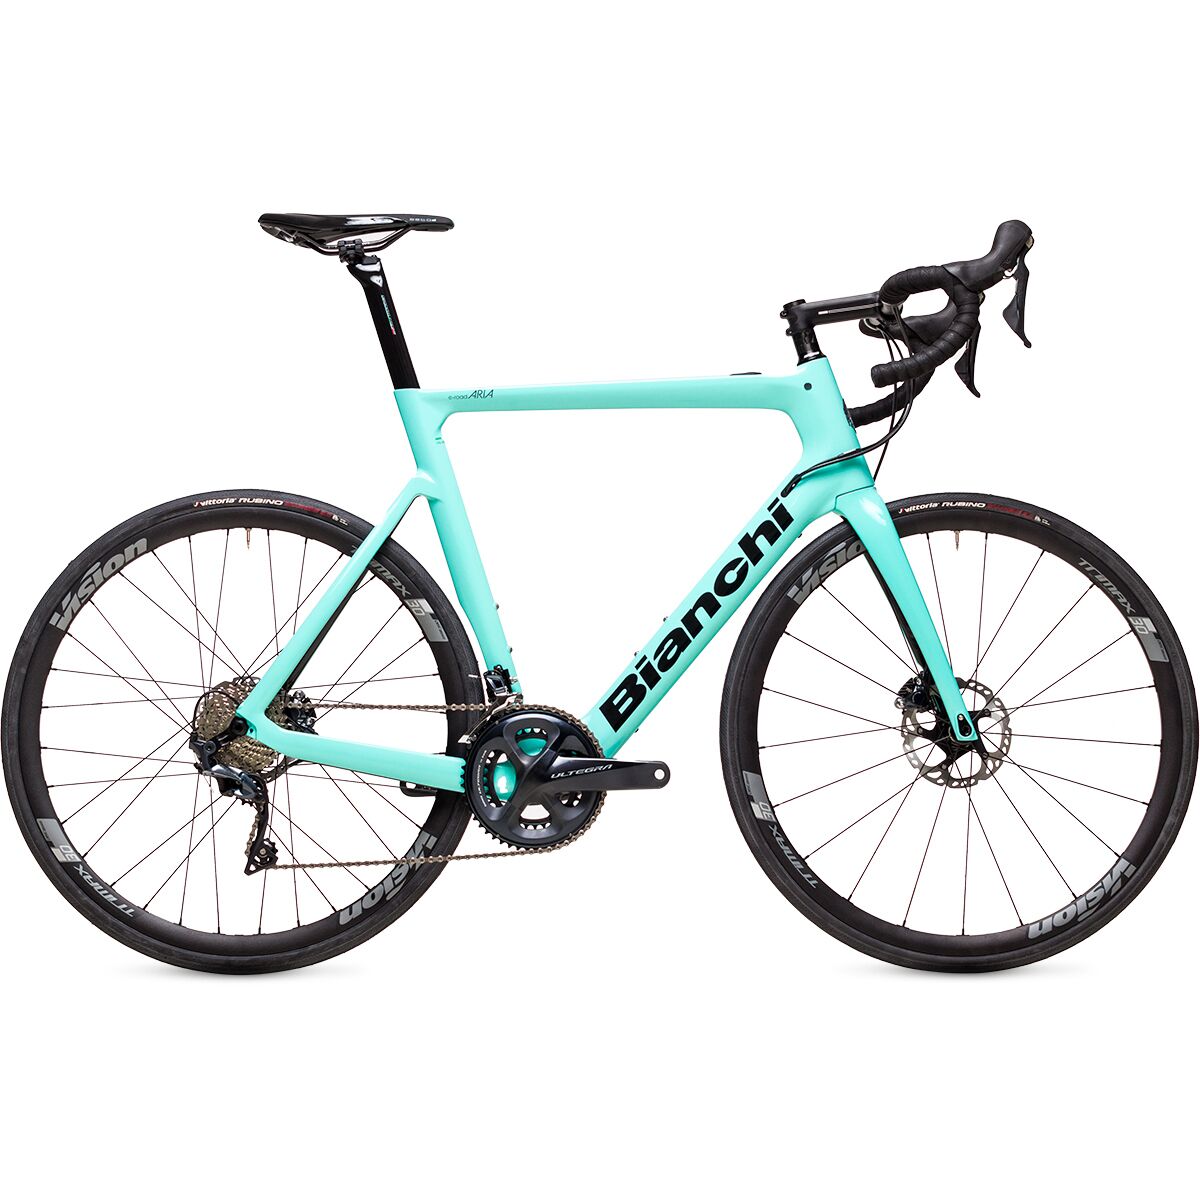 bianchi bikes for sale